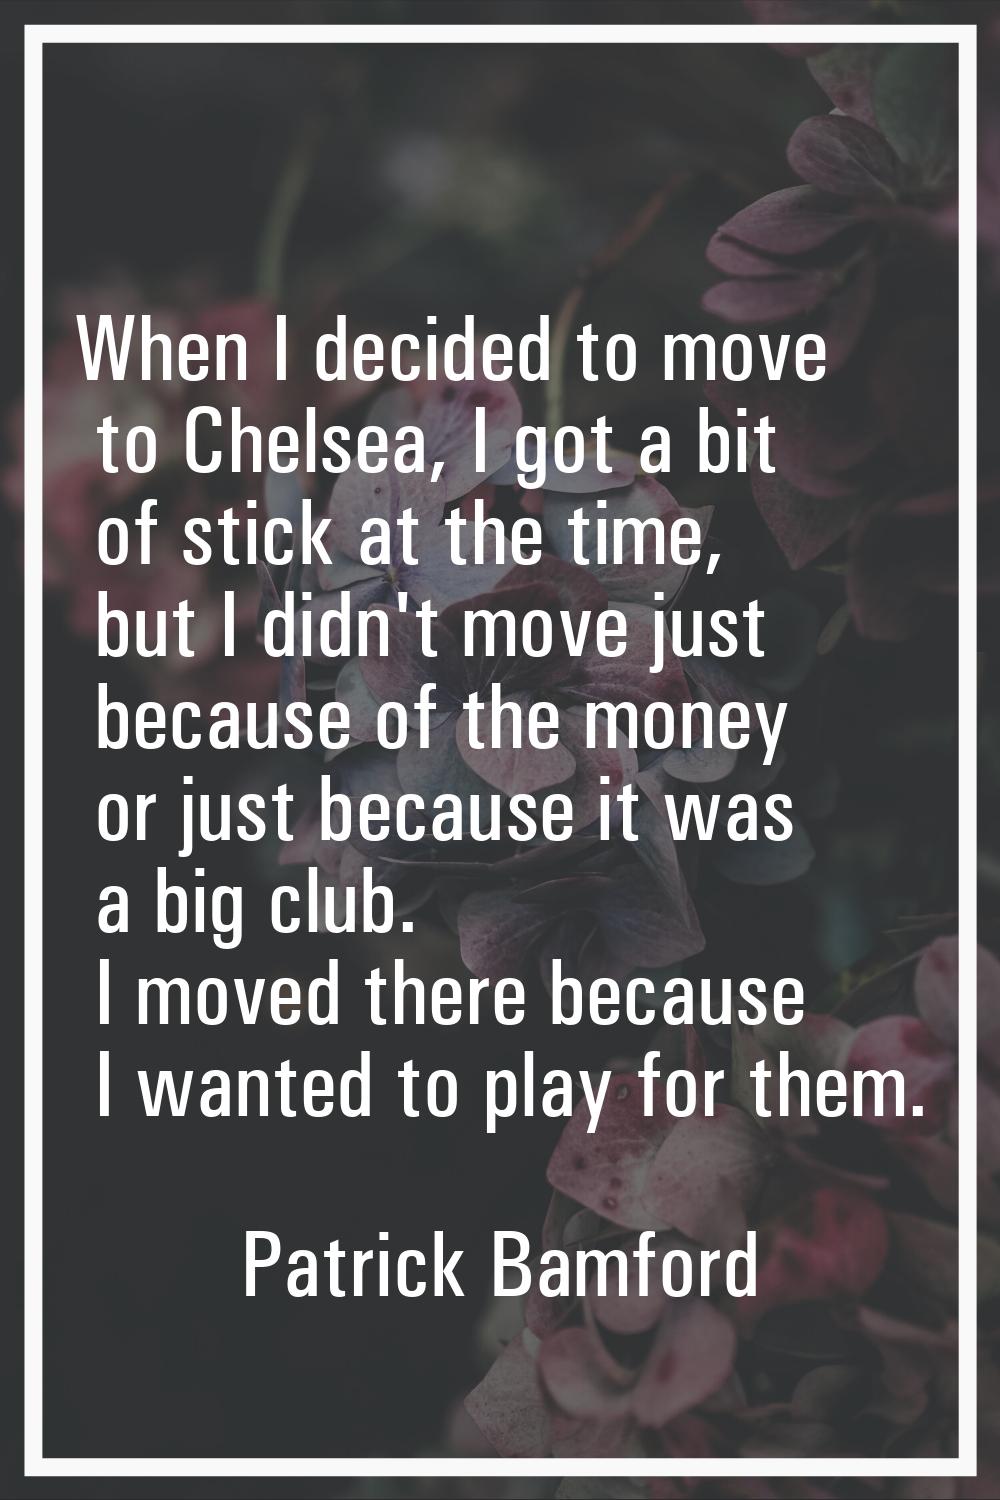 When I decided to move to Chelsea, I got a bit of stick at the time, but I didn't move just because